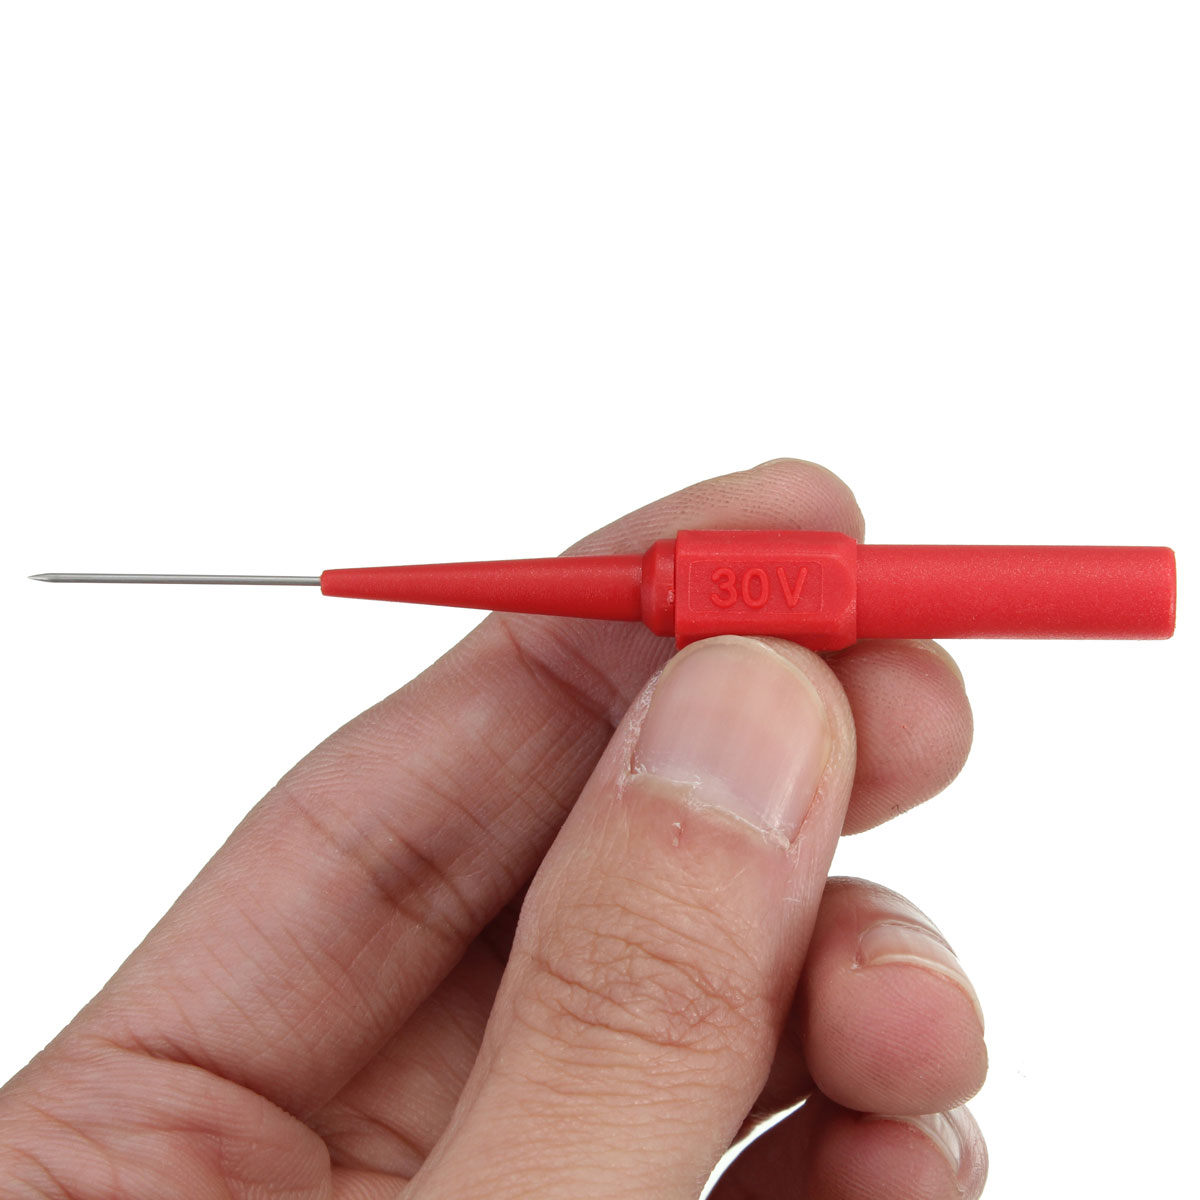 Details about   Insulation Piercing Needle Micro Pin NonDestructive Multimeter Testing Probe 